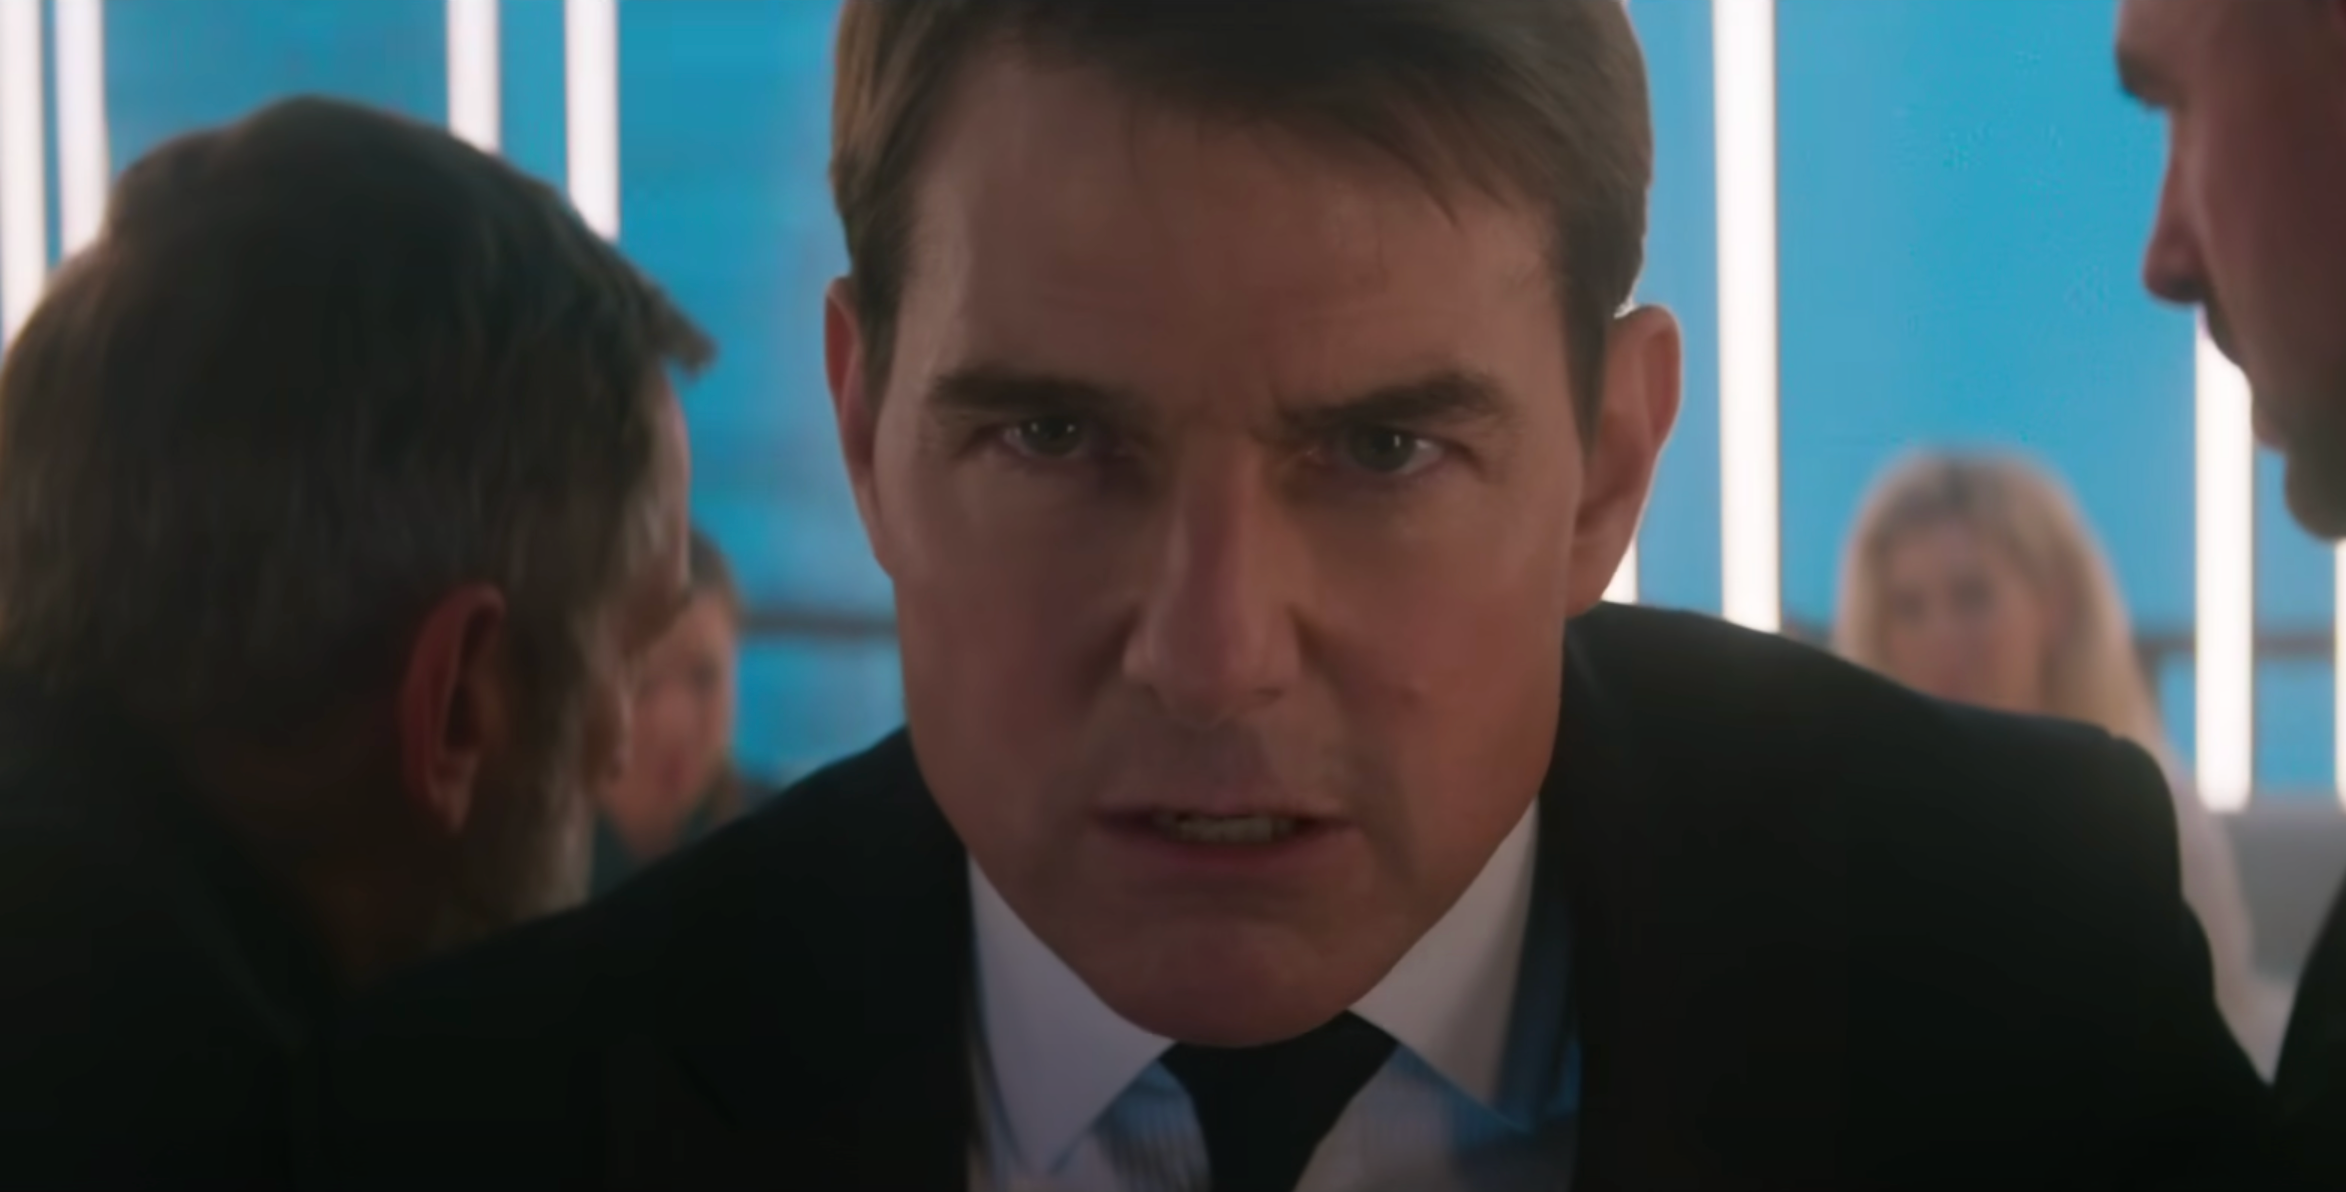 Mission: Impossible Dead Reckoning Part One Digital Release Date Reportedly Set